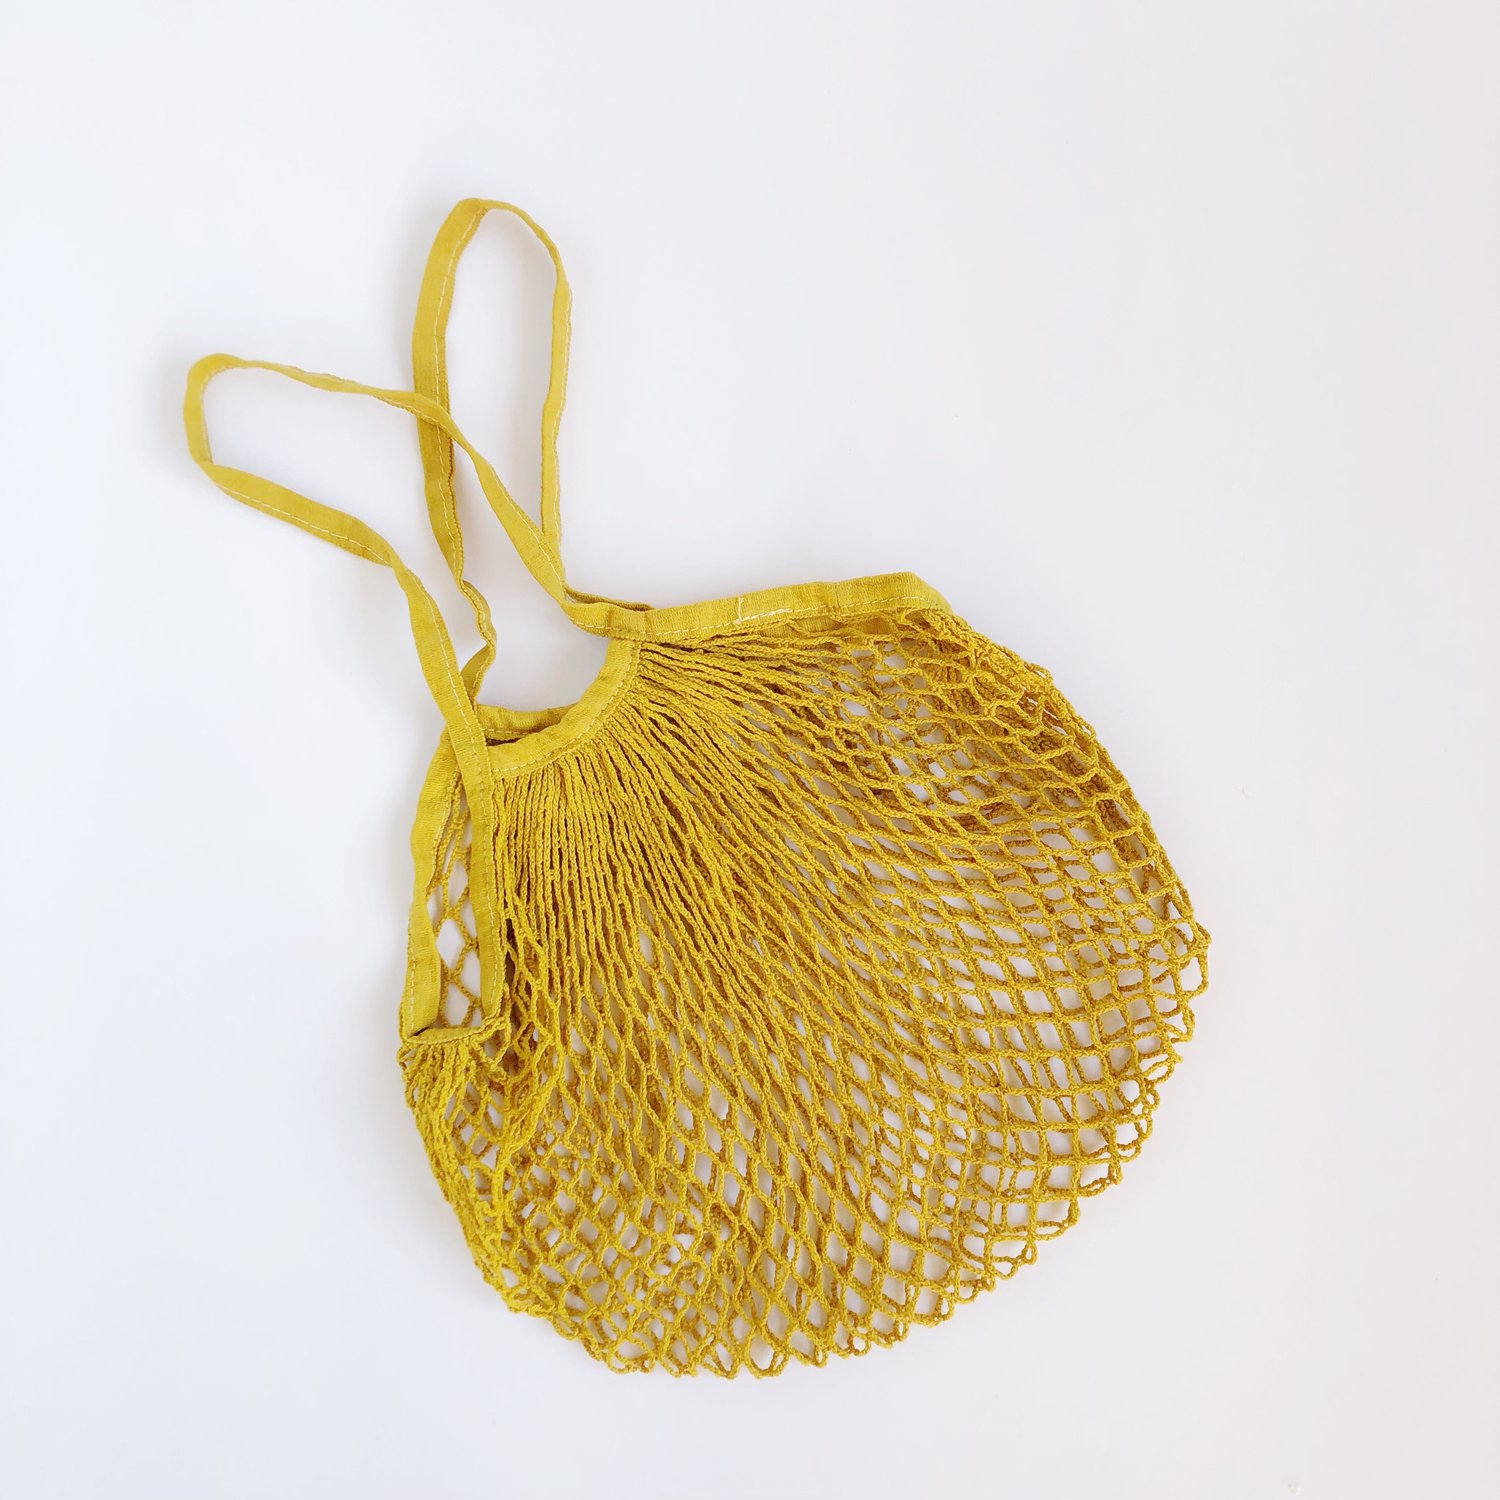 Image of Naturally Dyed Market Bag